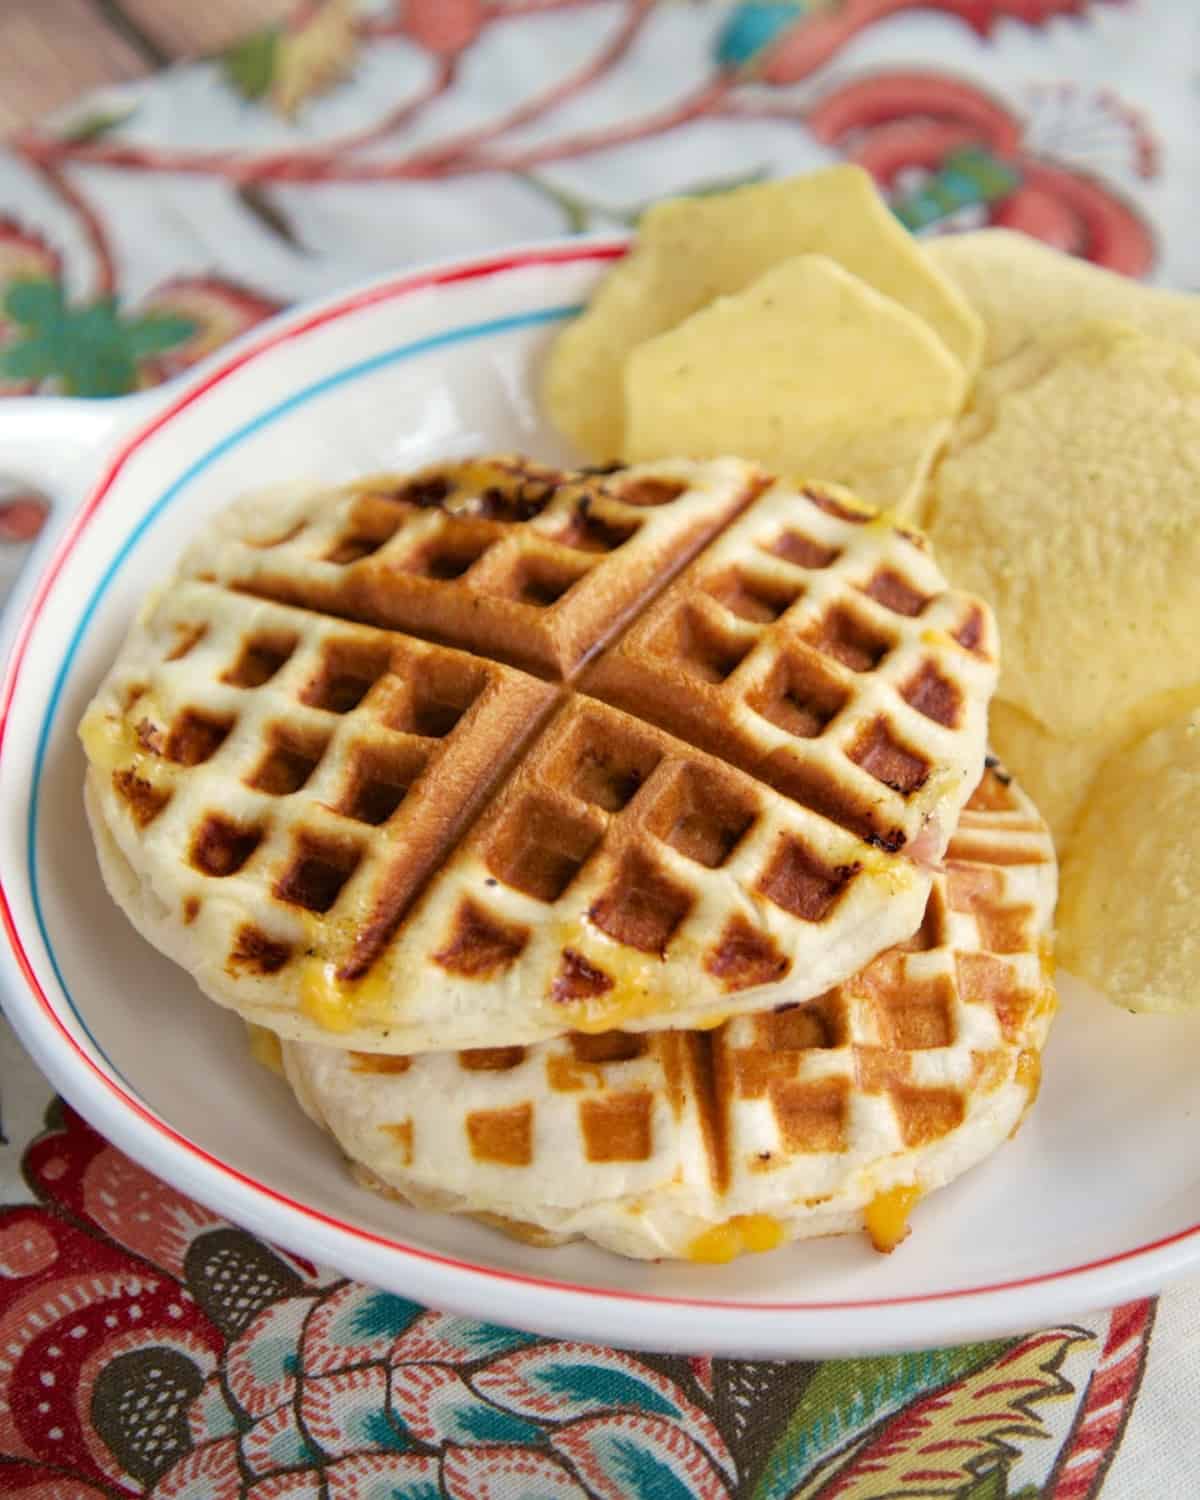 Ham & Cheese Waffle Sandwiches Recipe - ham and cheese stuffed inside a refrigerated biscuit and cooked in the waffle iron. SO much fun to eat!!